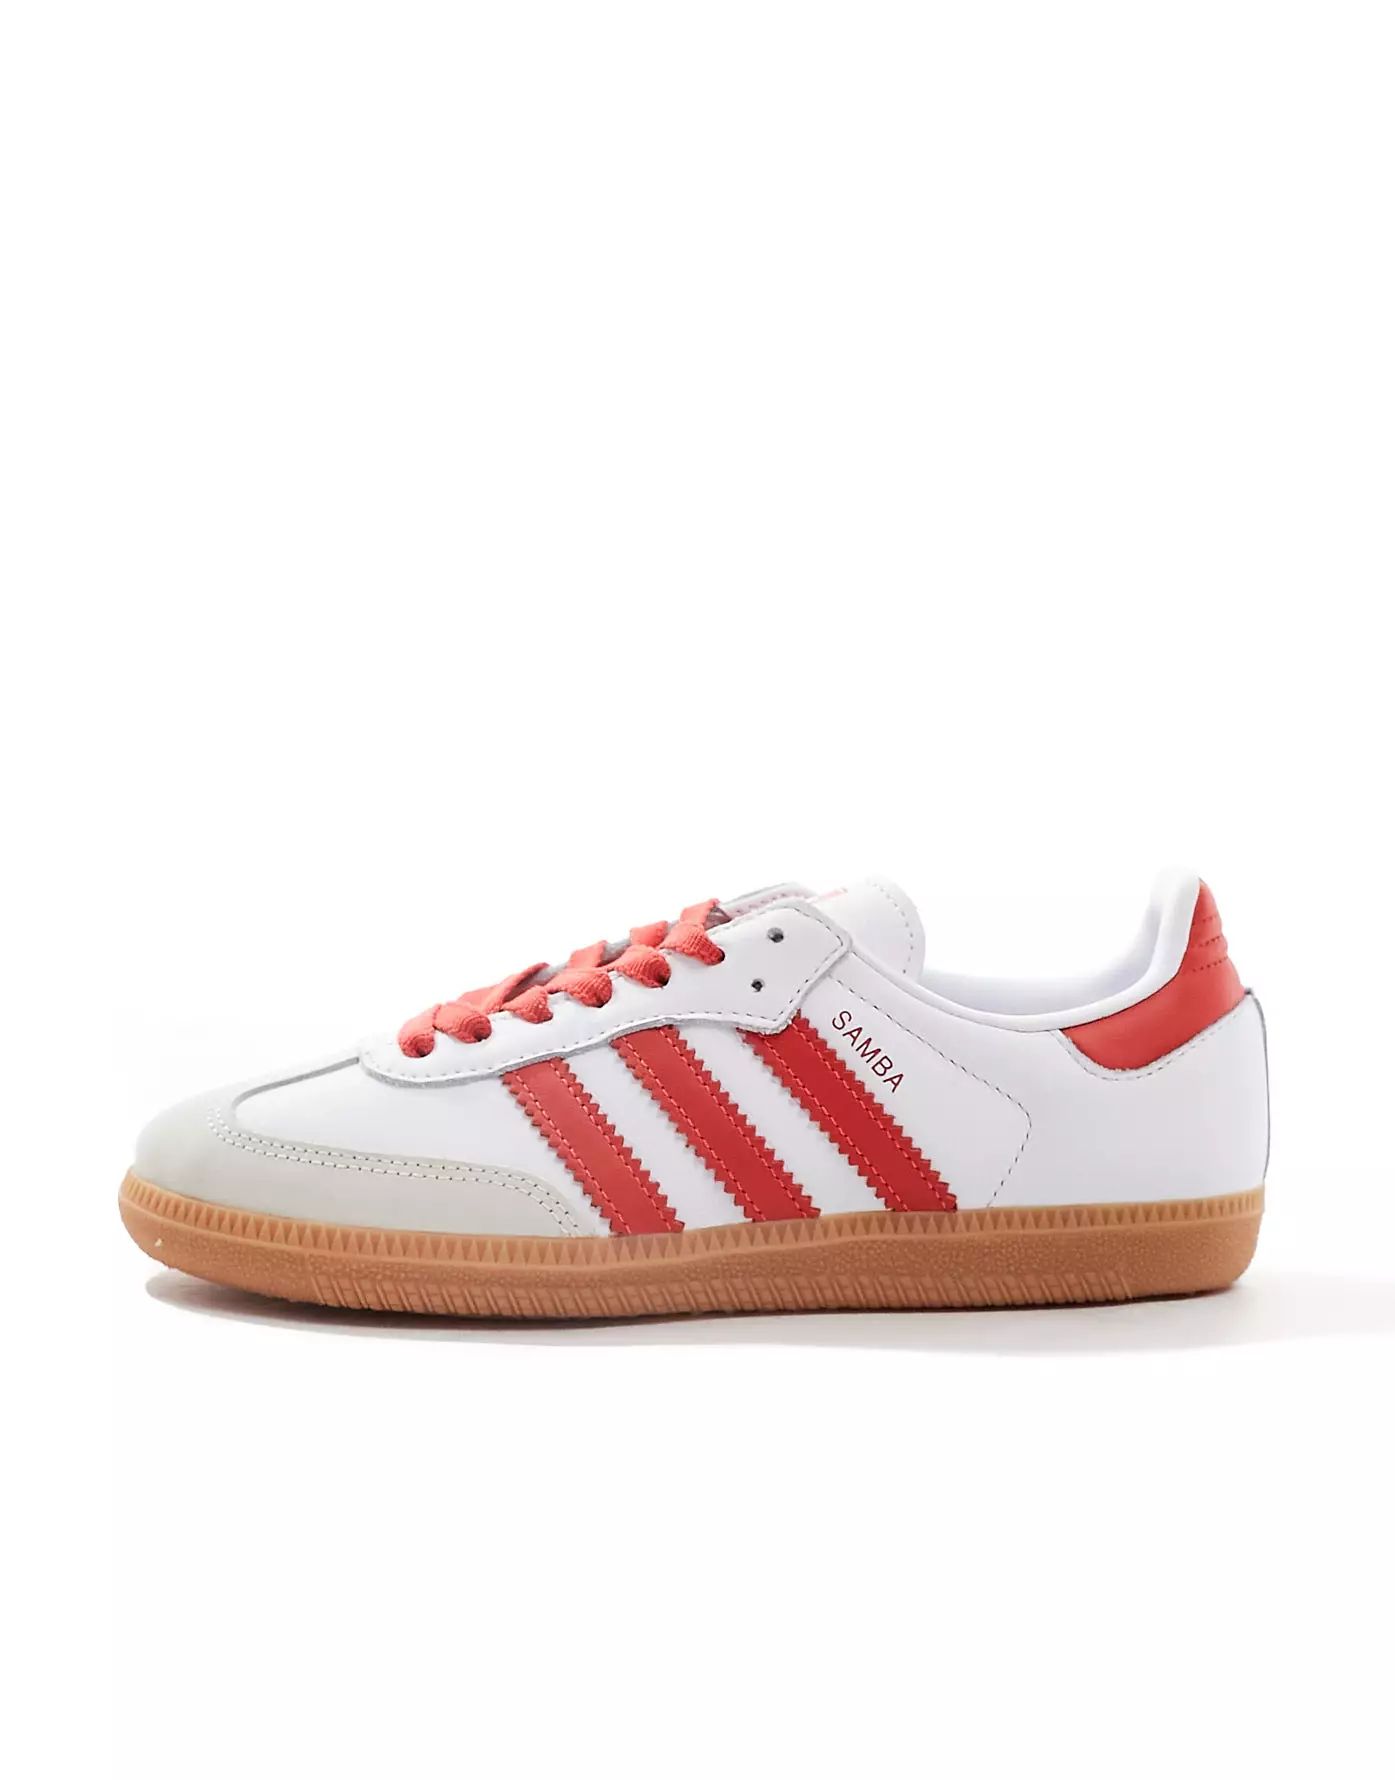 adidas Originals Samba OG trainers in white and bright red | ASOS | ASOS (Global)